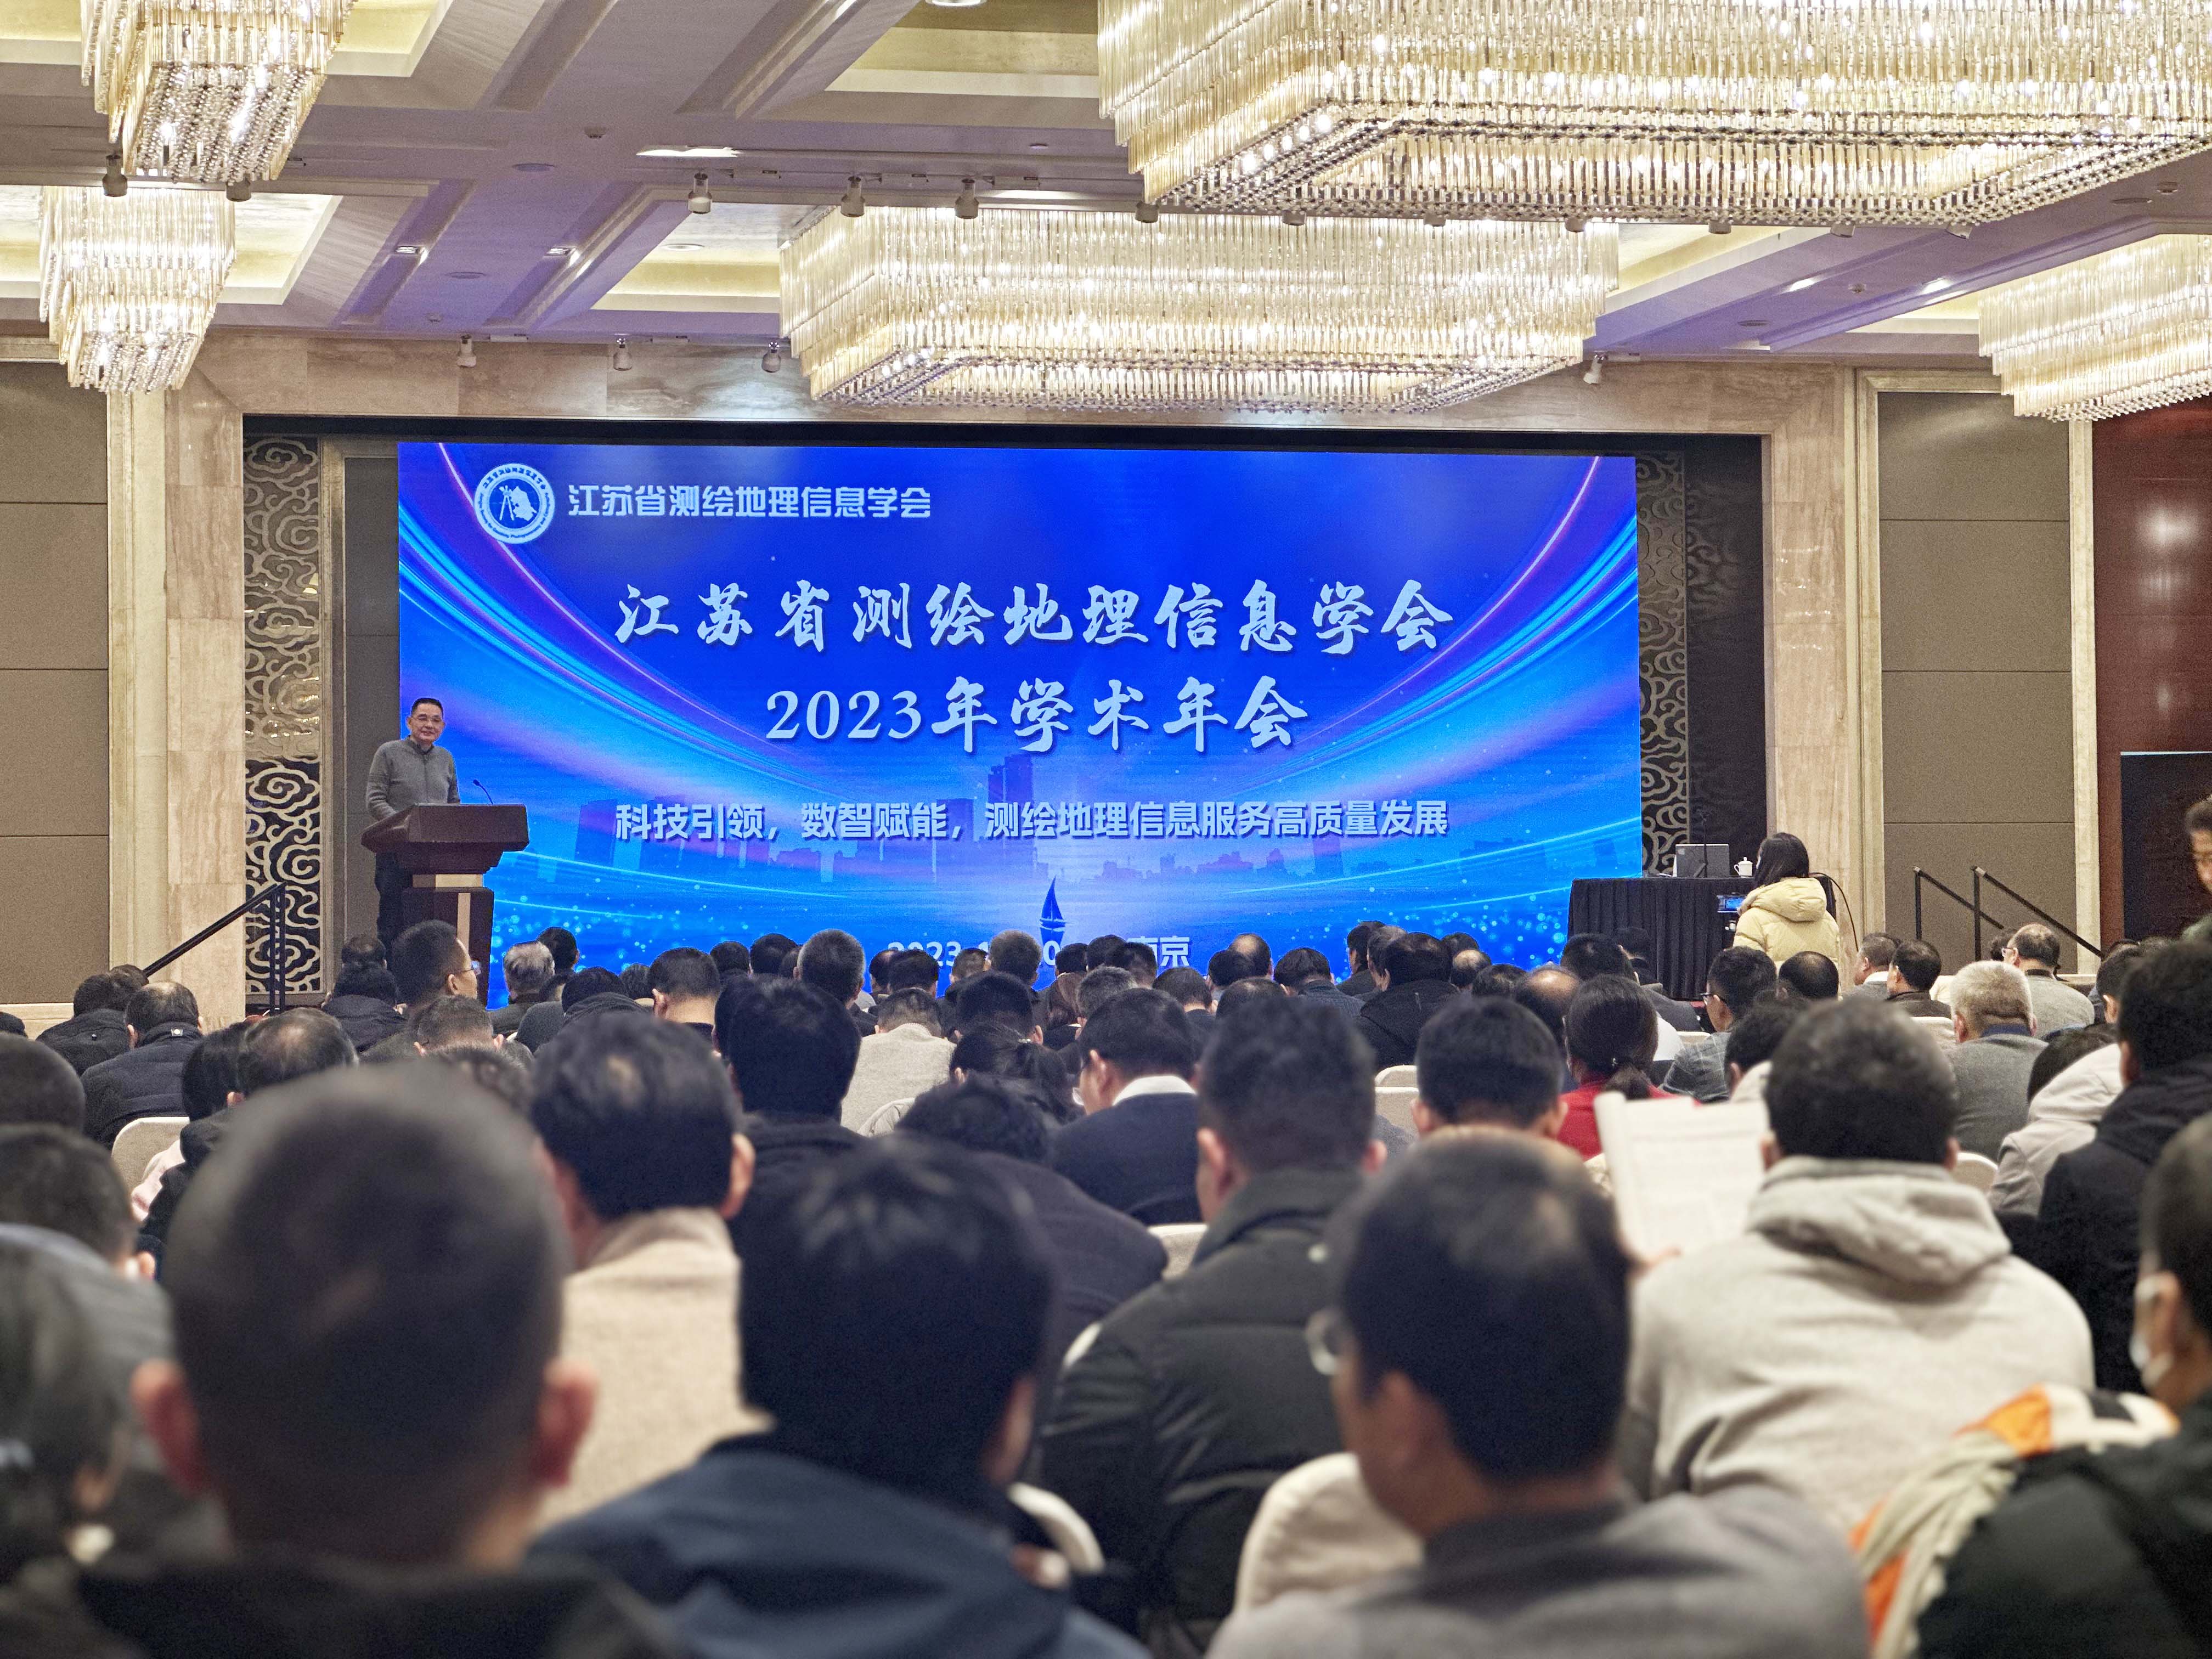 Our company appeared at the 2023 Academic Annual Meeting of